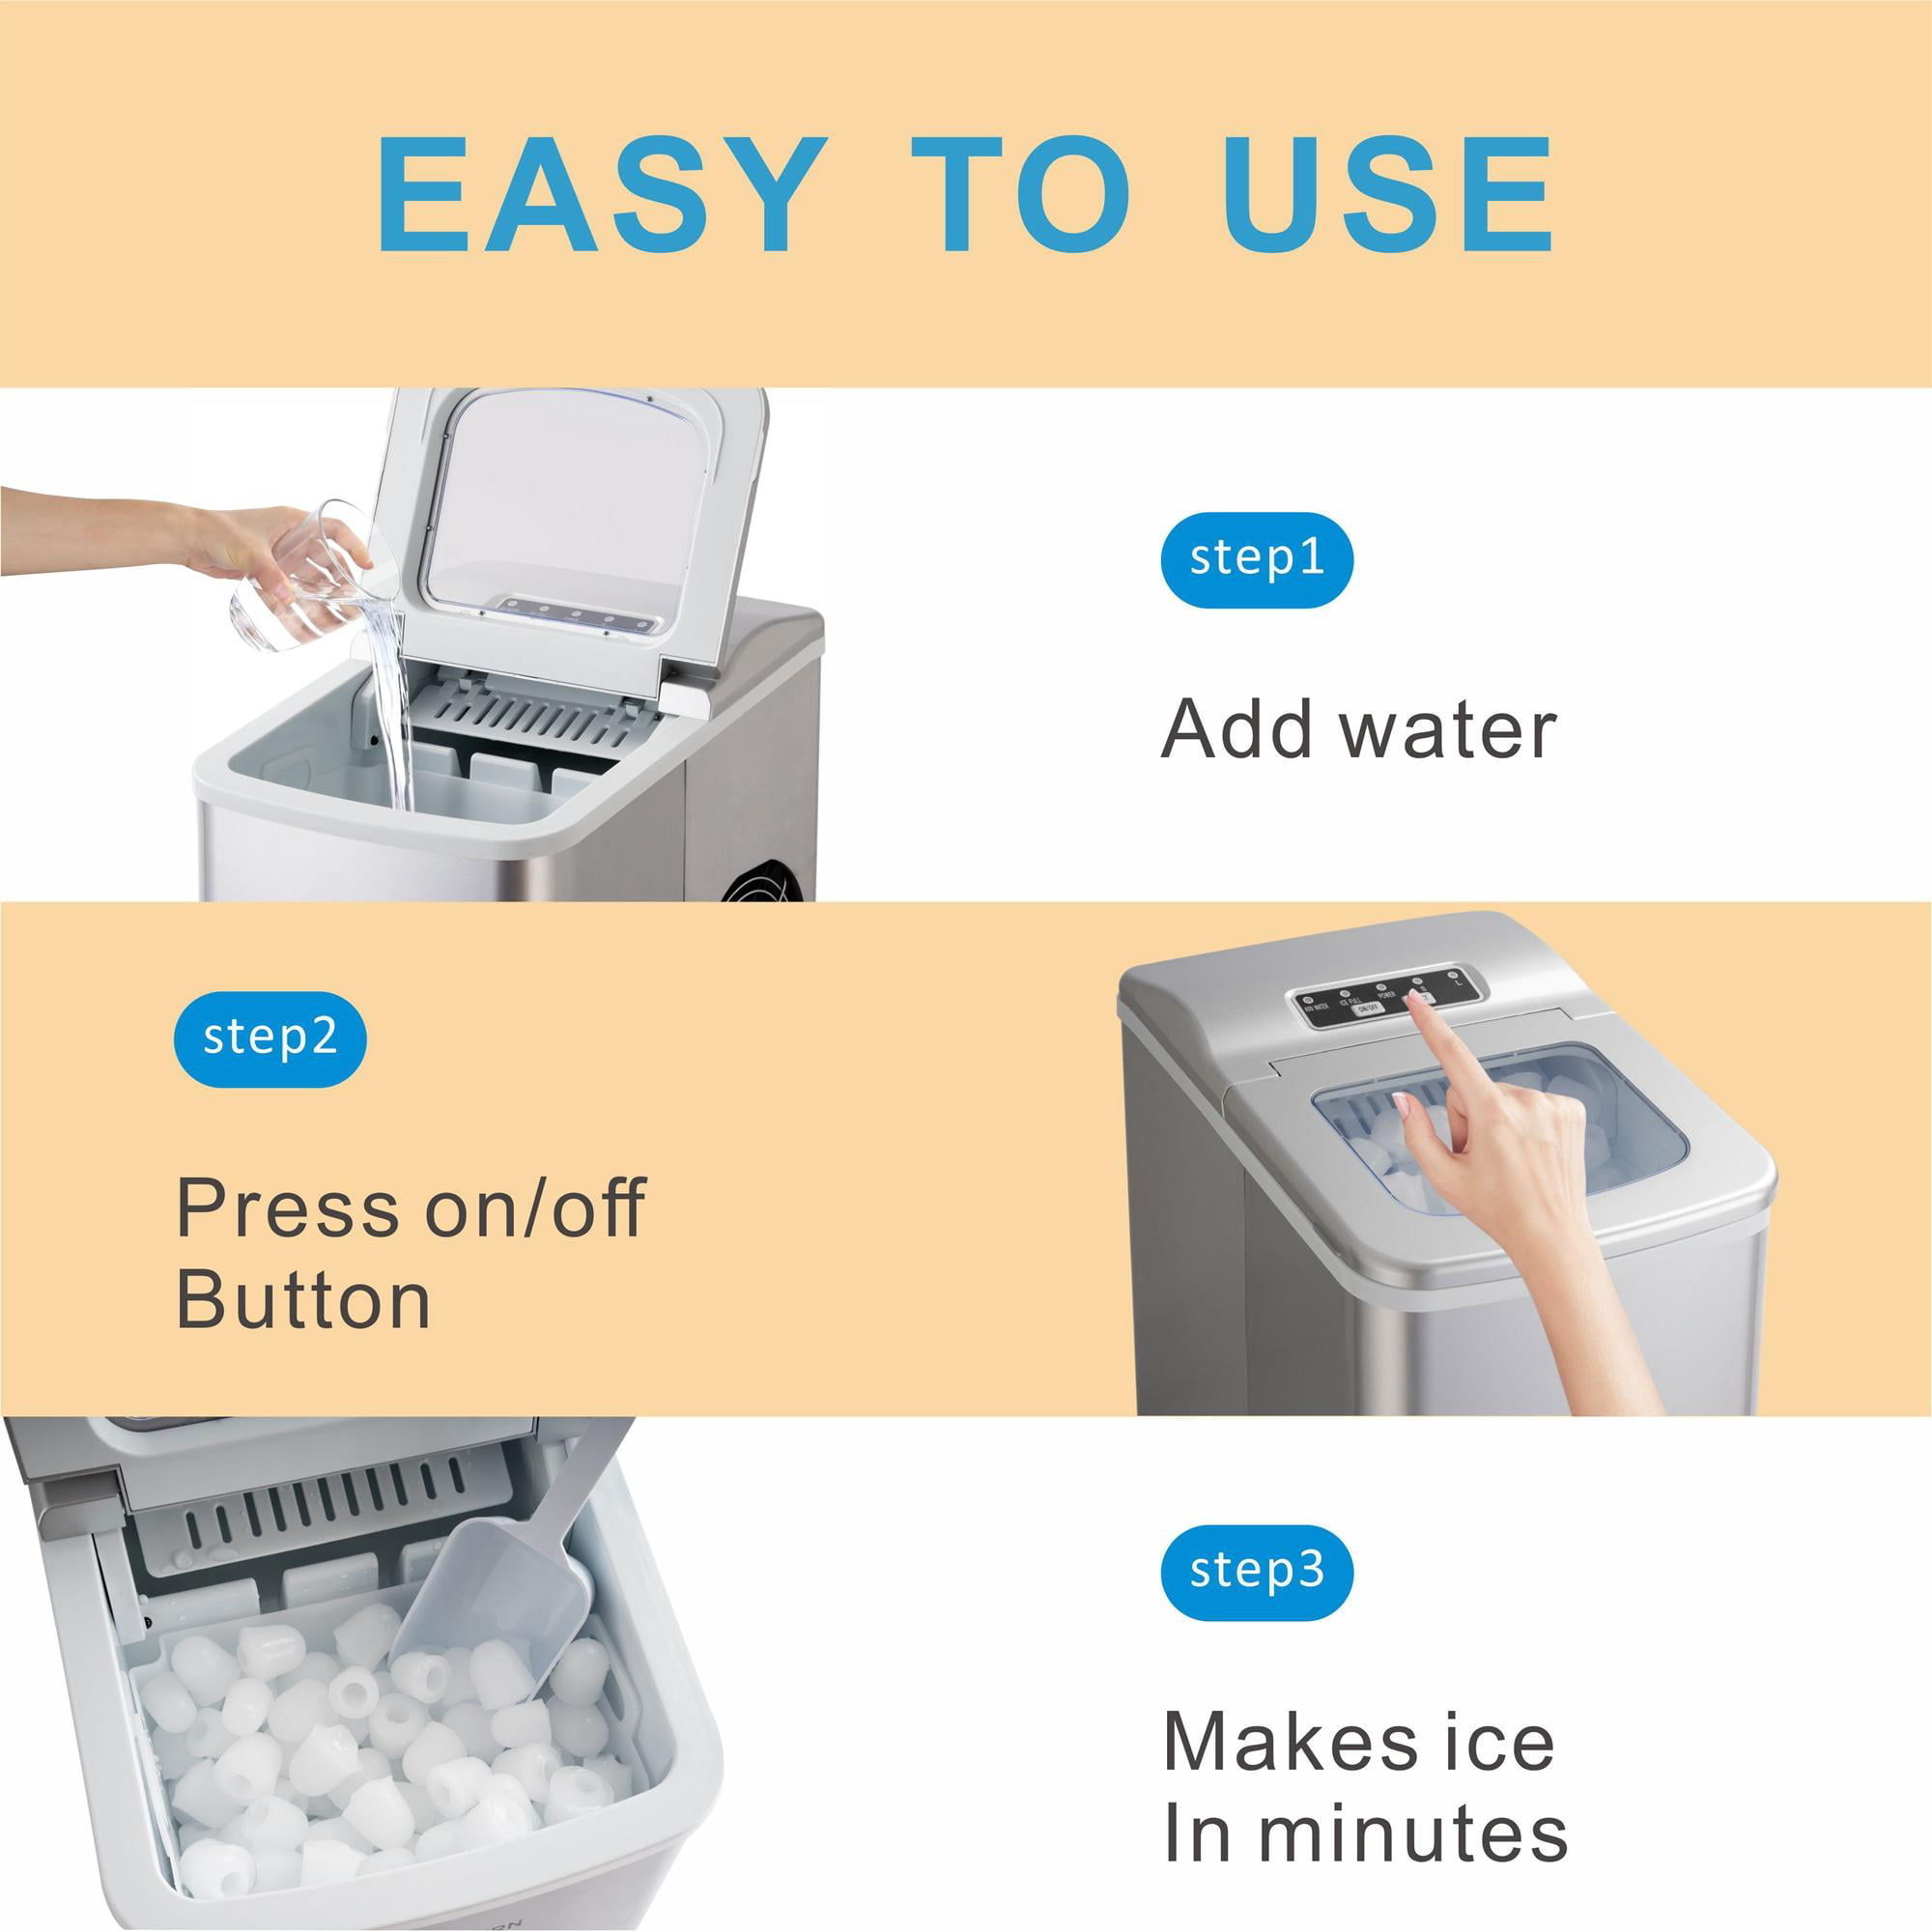 MeJa Ice Cube Maker for Home Kitchen Portable Counter Top Small Ice Cube Machine Electric Silent Ice Maker Machine with Scoop & Removable Basket Easy Operation 9 Ice Cubes Within 6-13 Minutes Silver